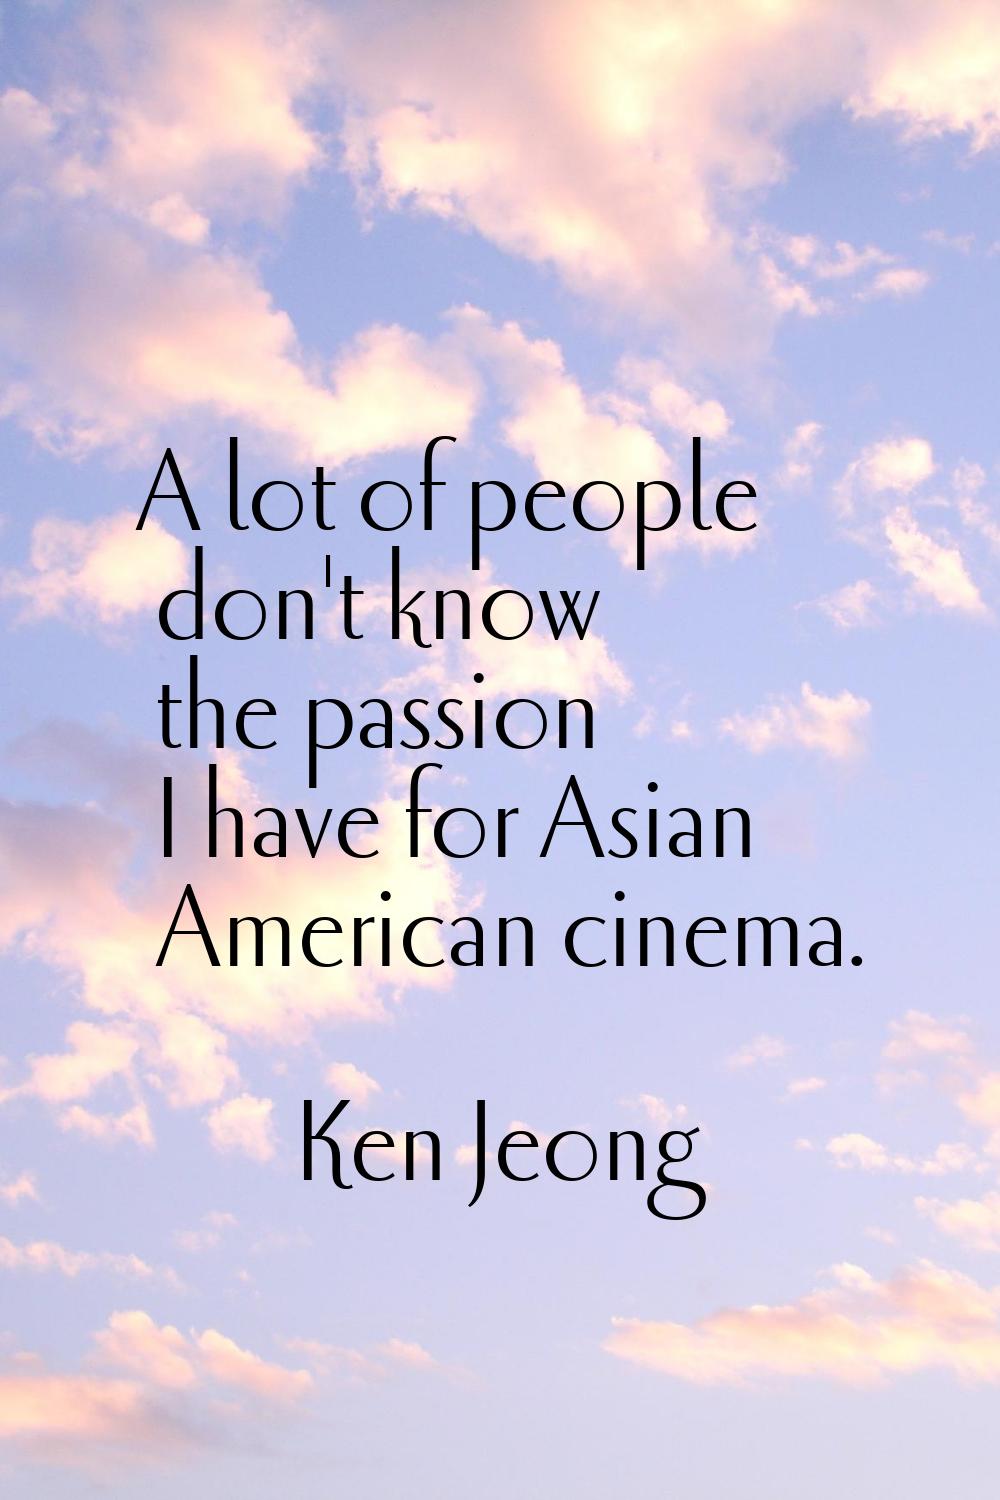 A lot of people don't know the passion I have for Asian American cinema.